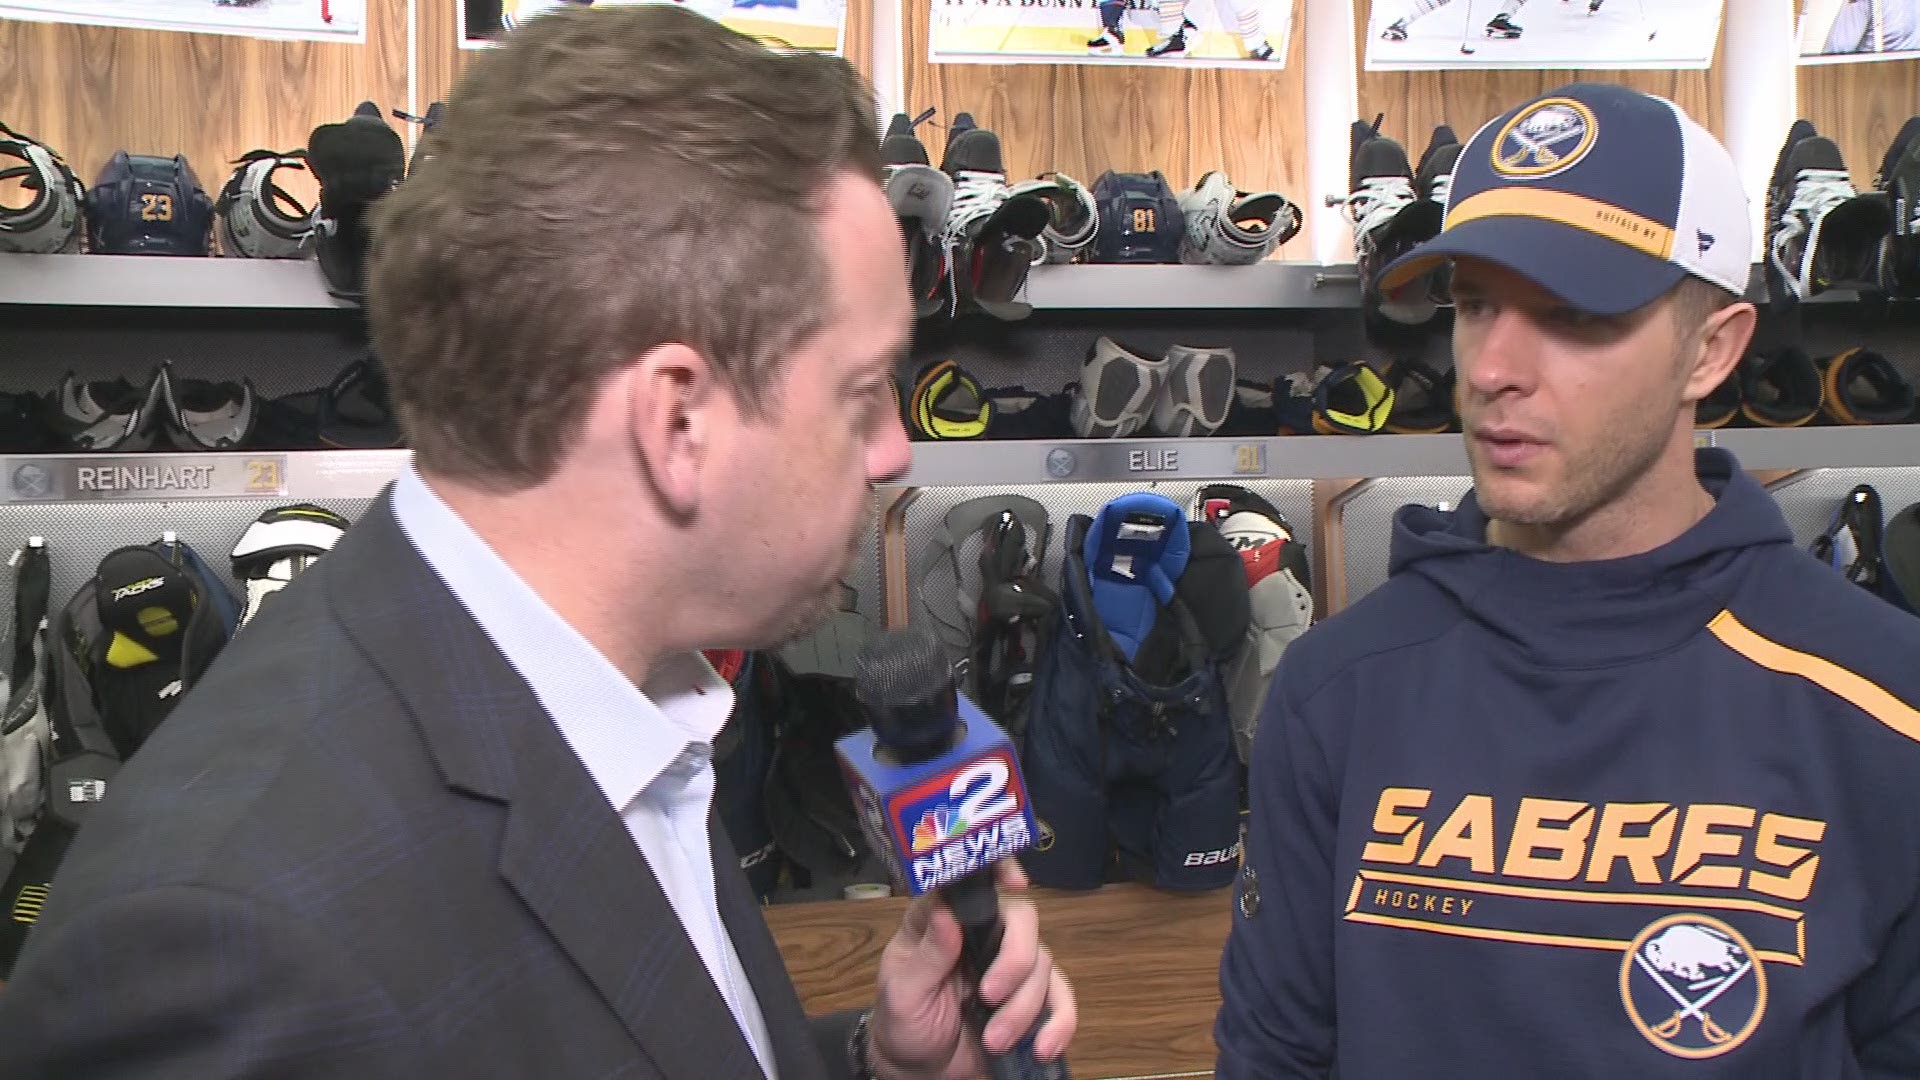 WGRZ's Adam Benigni had the chance to speak with Sabres veteran forward Jason Pominville on team success, and reaching a milestone.